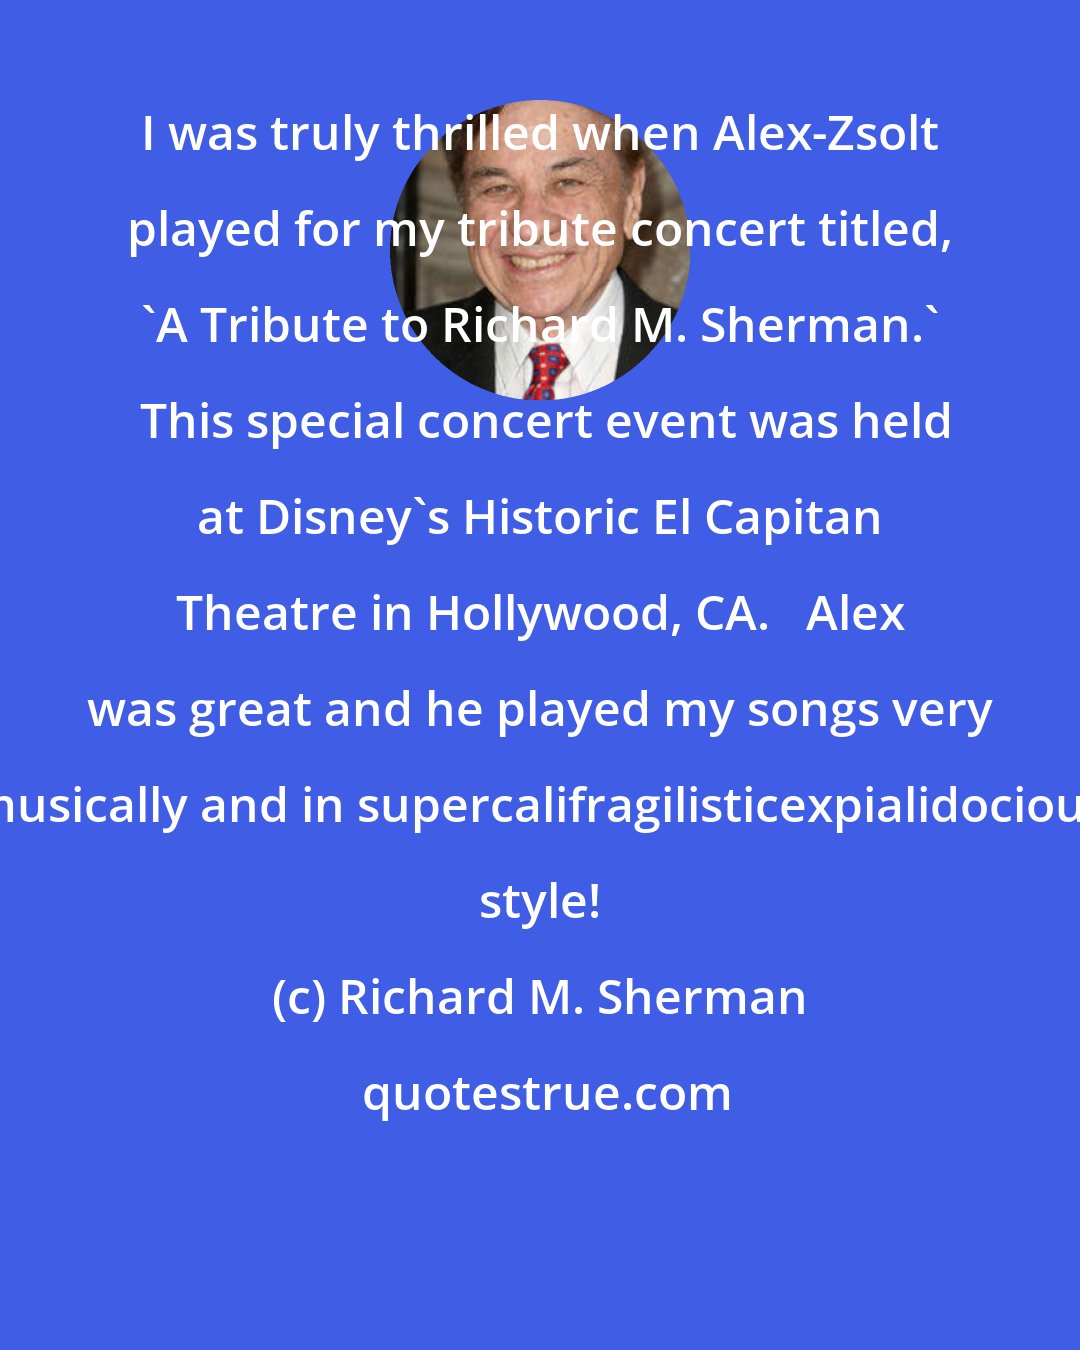 Richard M. Sherman: I was truly thrilled when Alex-Zsolt played for my tribute concert titled, 'A Tribute to Richard M. Sherman.'  This special concert event was held at Disney's Historic El Capitan Theatre in Hollywood, CA.   Alex was great and he played my songs very musically and in supercalifragilisticexpialidocious style!